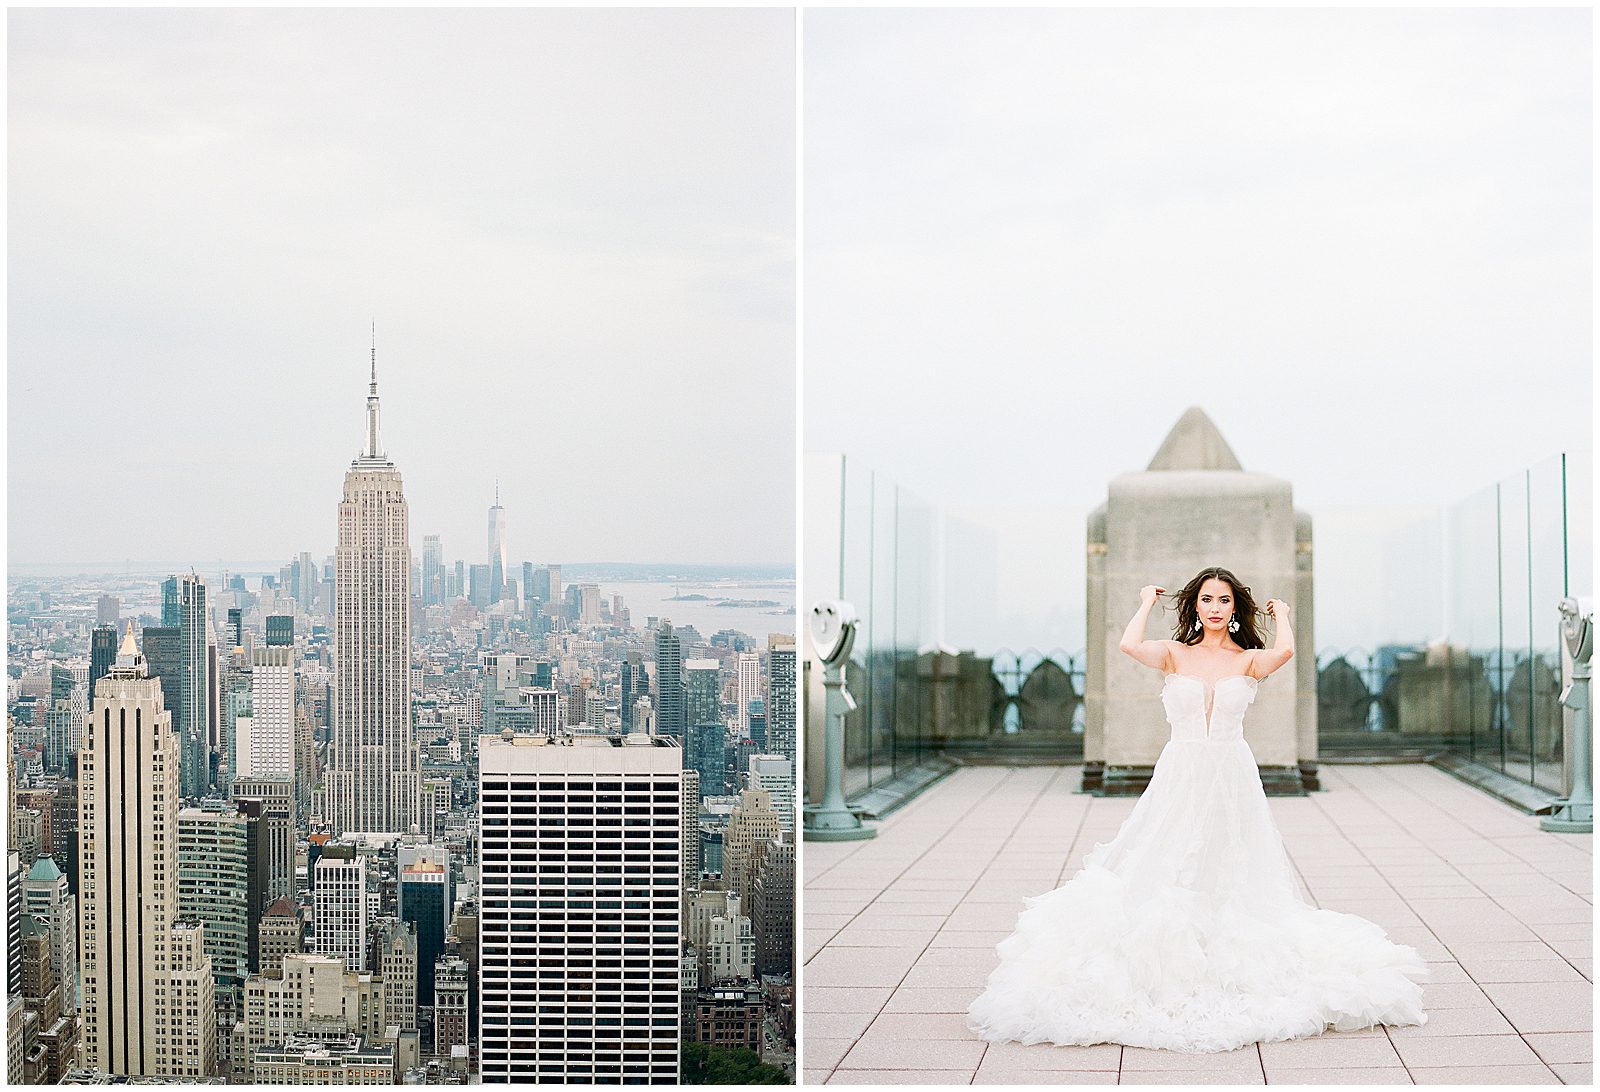 Top Of The Rock View of The Empire State Building and Bridal Portrait Photos